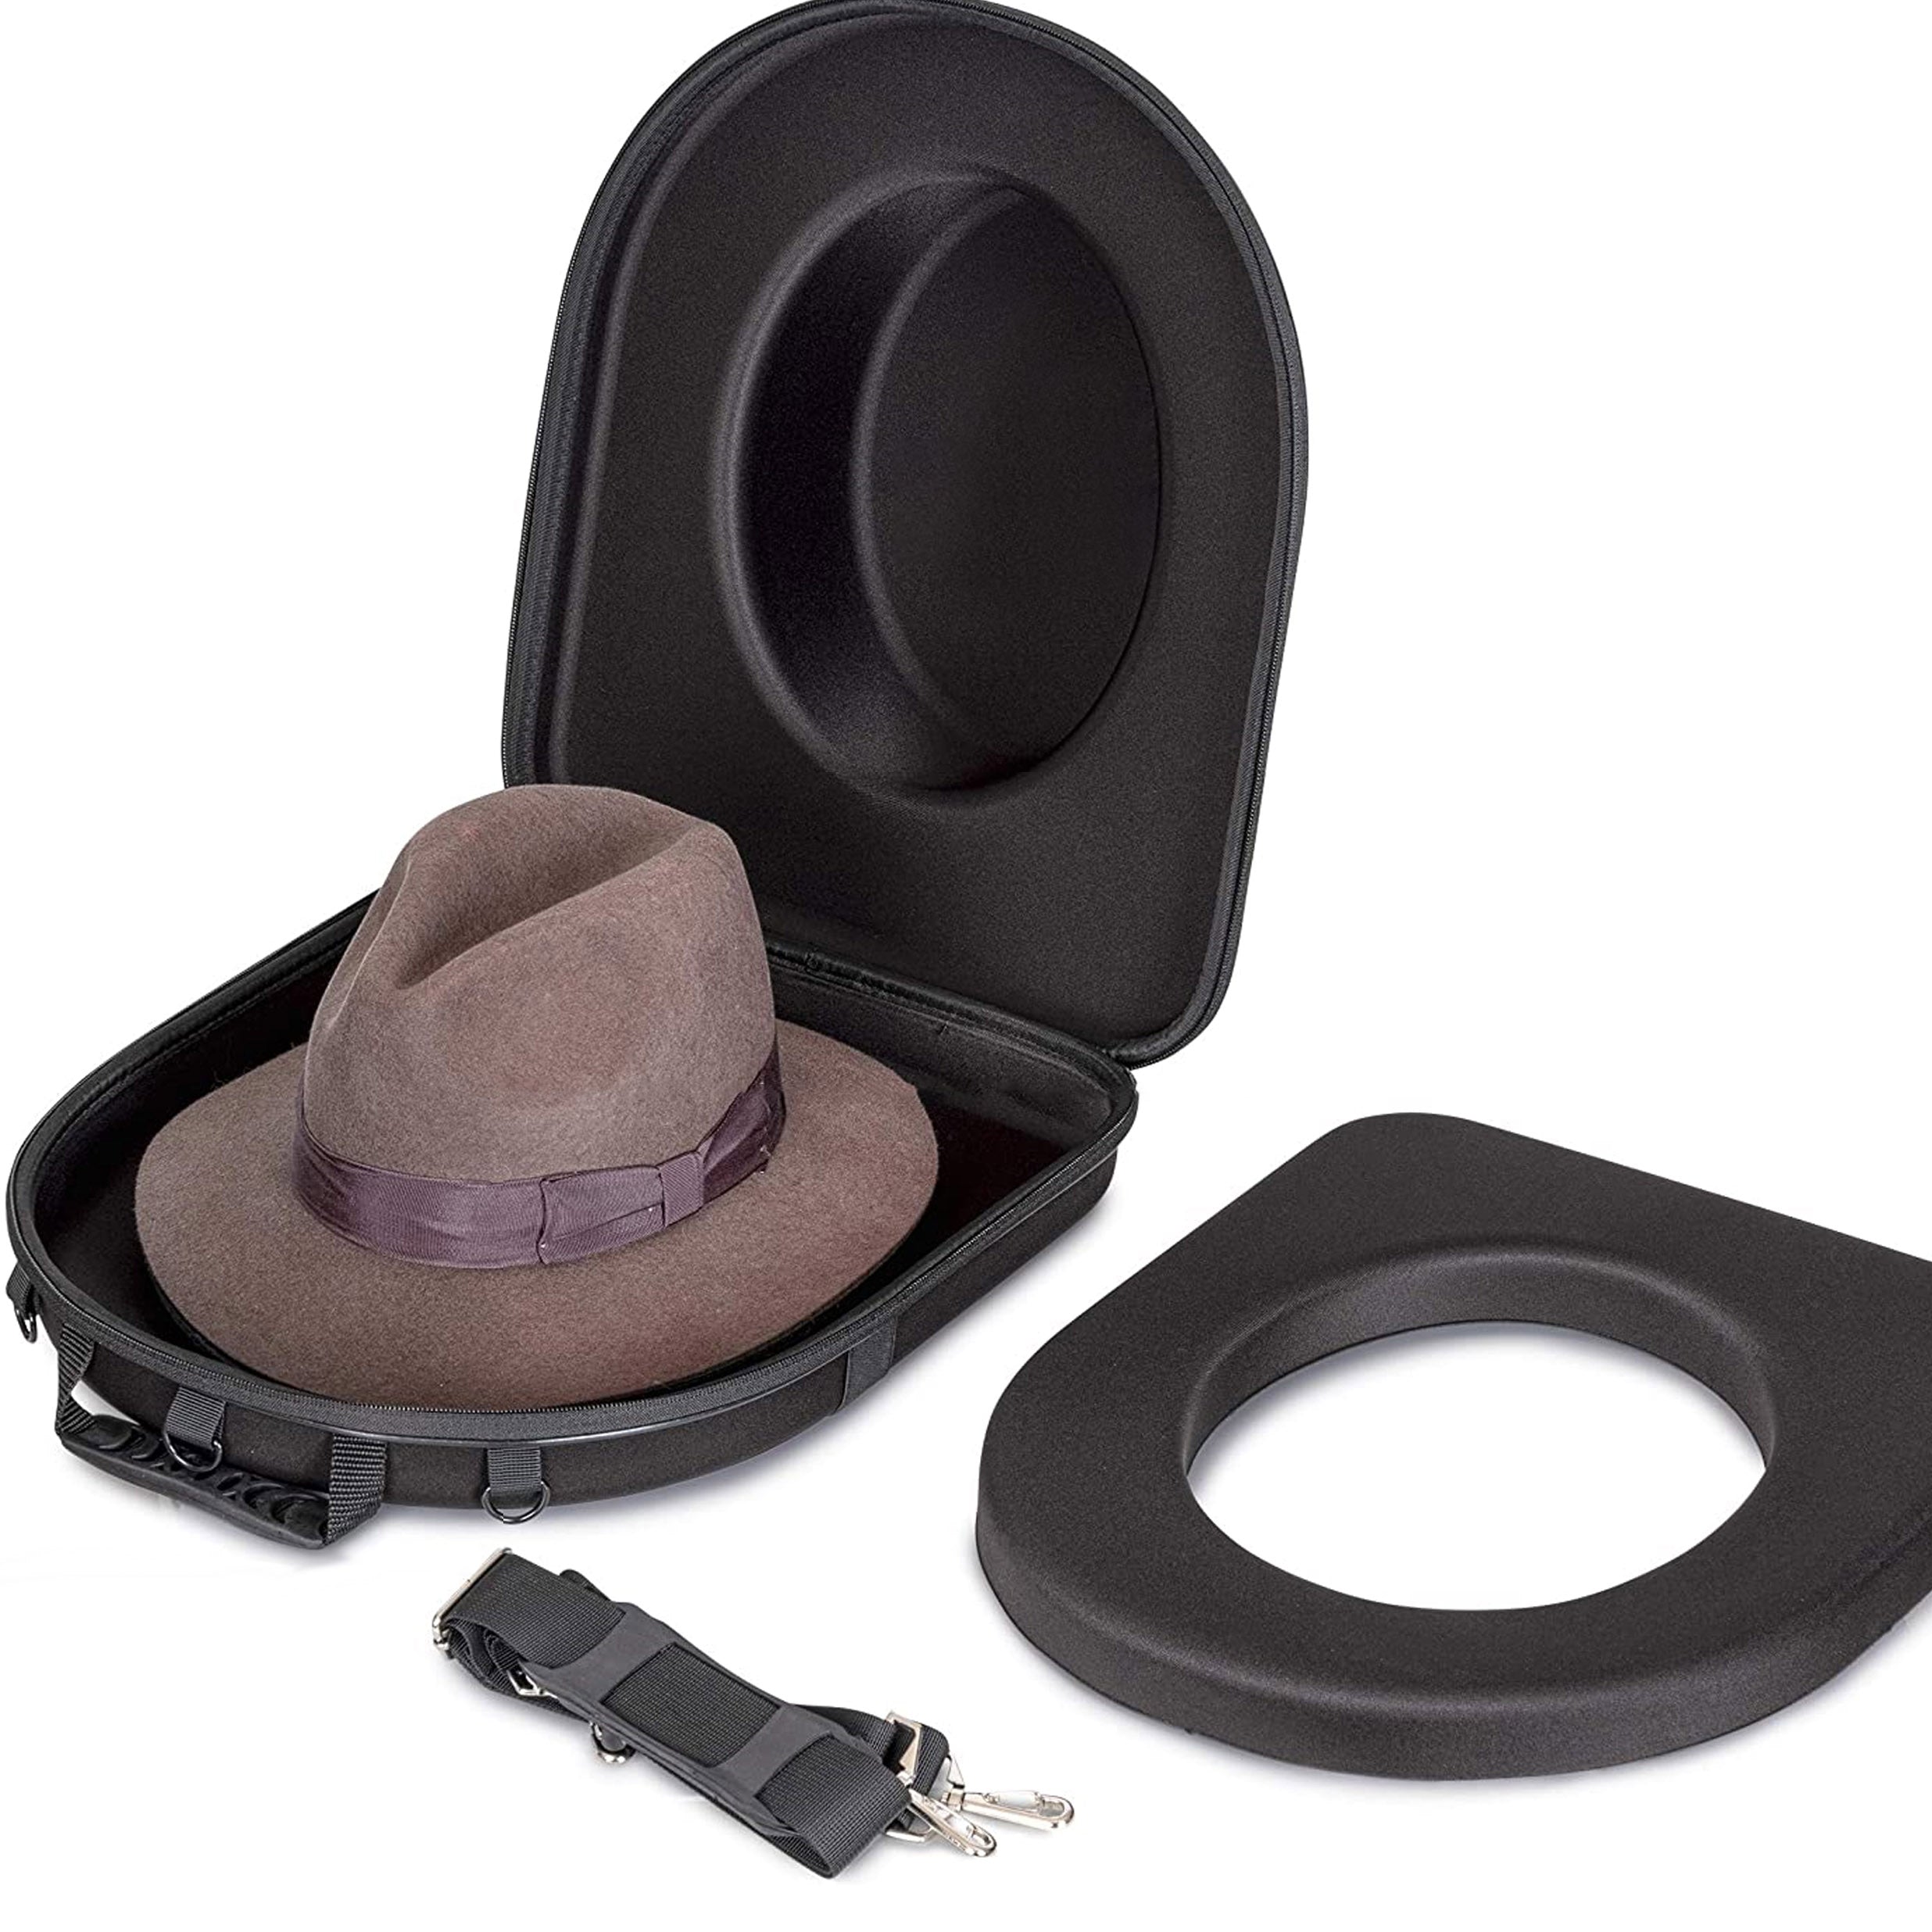  Fancemot Travel Hat Case for Cowboy, Fedora, Panama, Hard Shell  Travel Hat Box - Equipped with Carrying Handle, Shoulder Strap, Luggage  Strap, Hat Carrier Case Easily Straps to Suitcase : Home